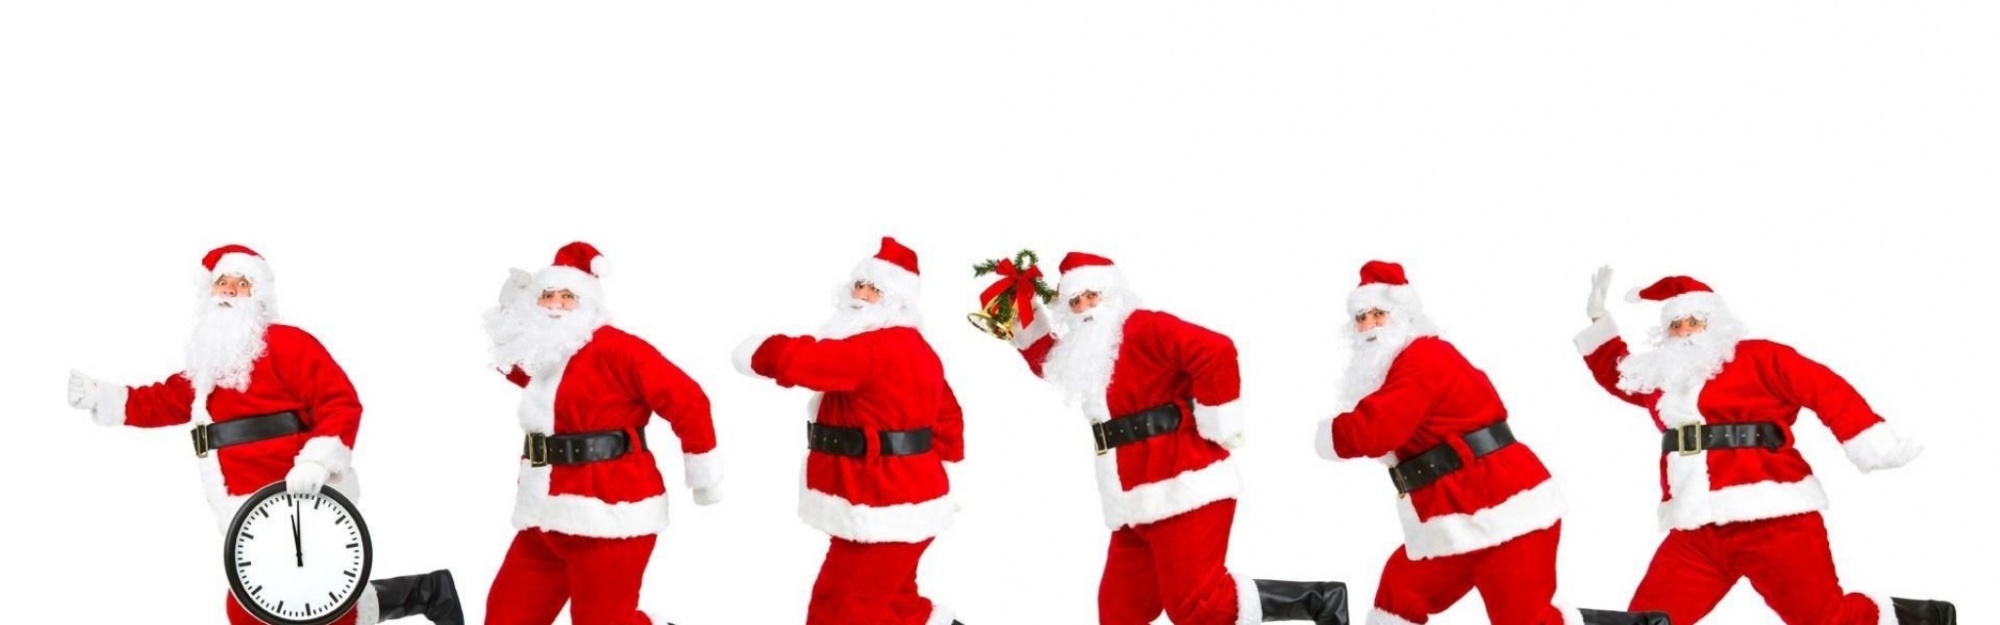 New Year Christmas Santa Claus Five Go Watch Gift